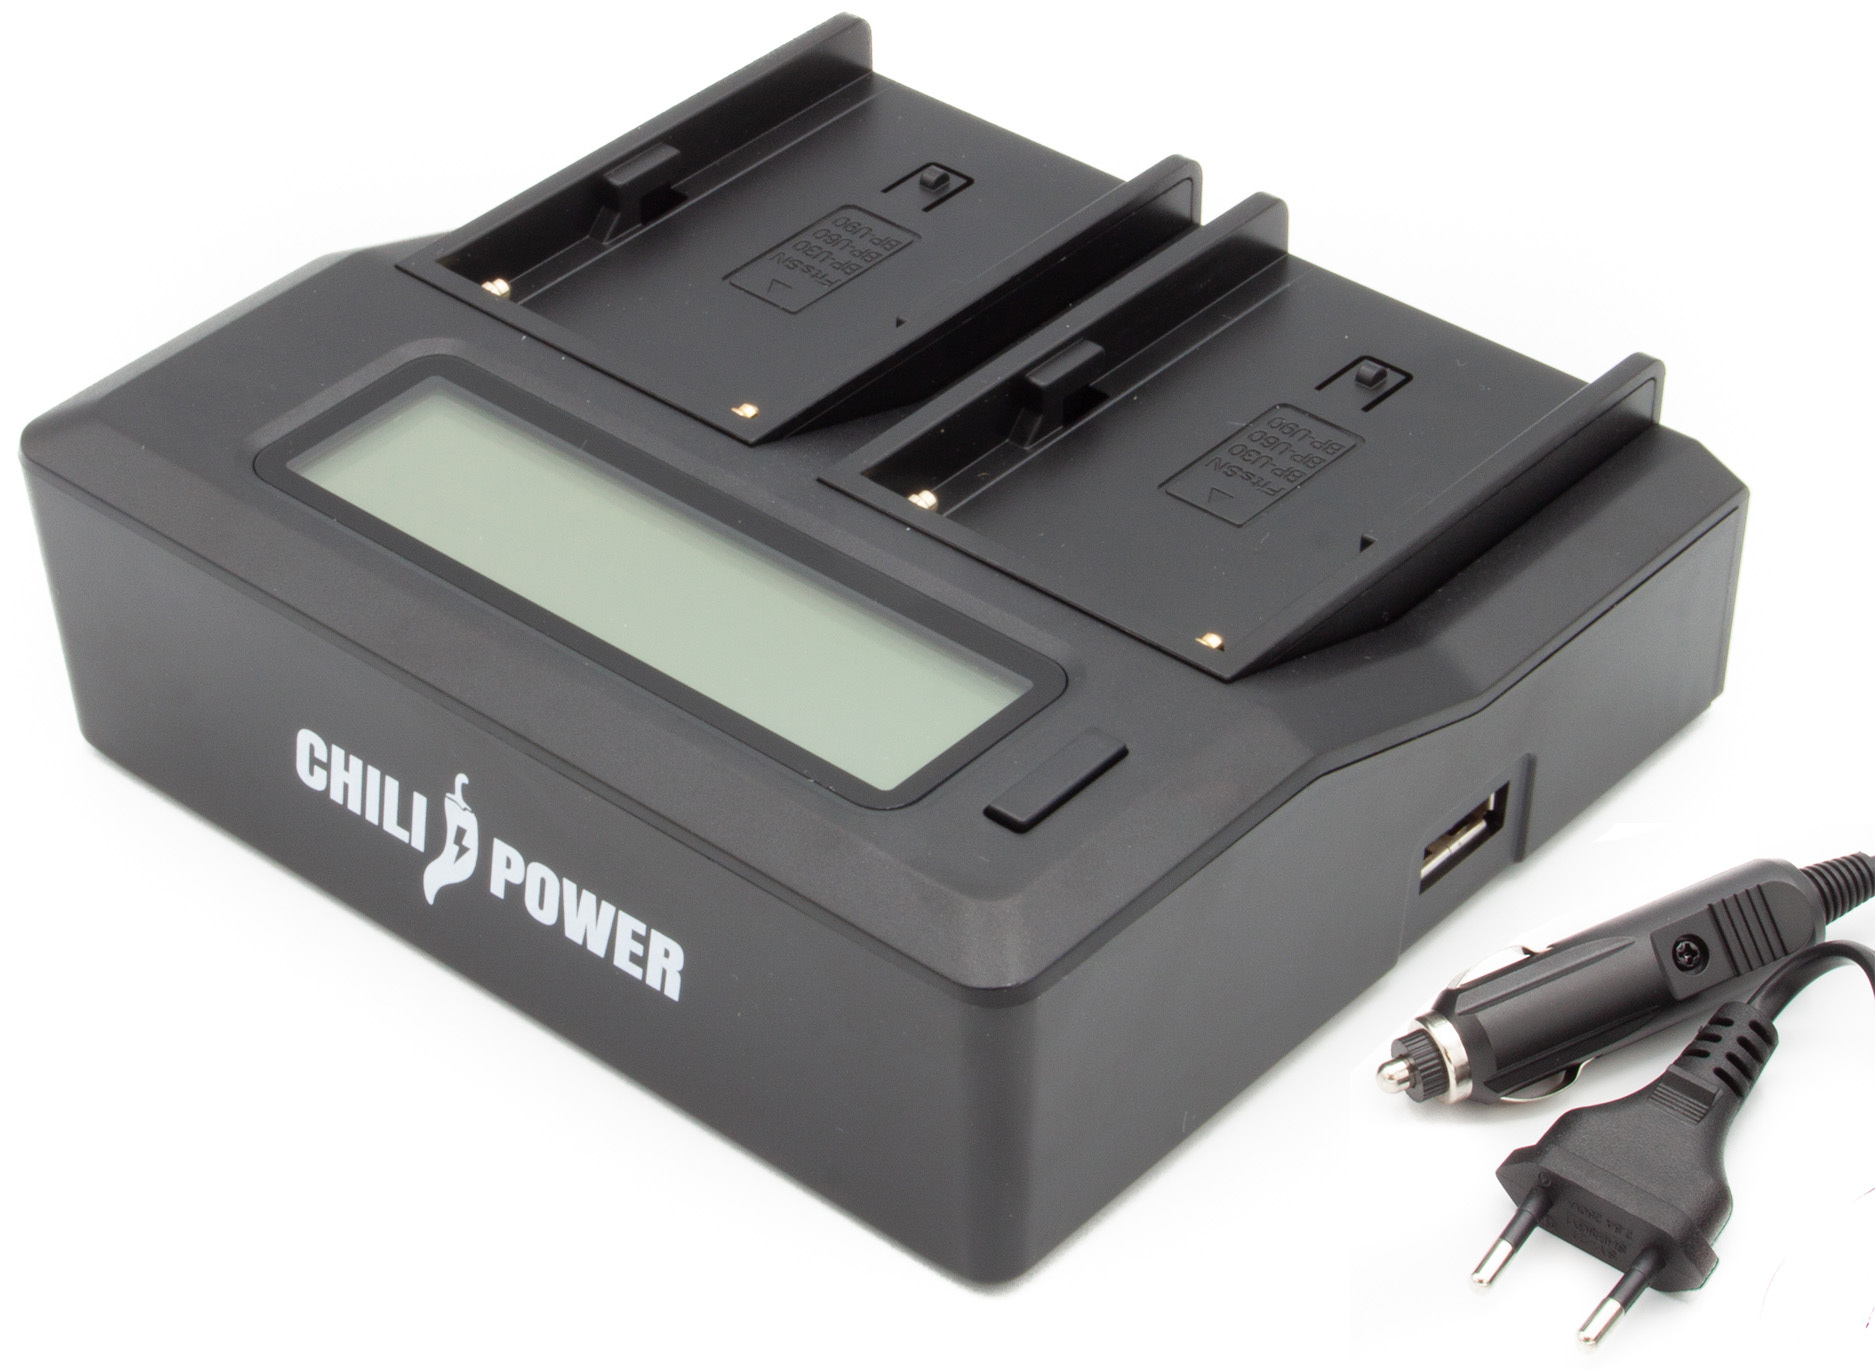 ChiliPower Duo oplader voor 2 camera-accu's Sony NP-FM30, NP-FM50, NP-QM71 - met LCD scherm Duo oplader voor 2 camera-accu's Sony NP-FM30, NP-FM50, NP-QM71 - met LCD scherm